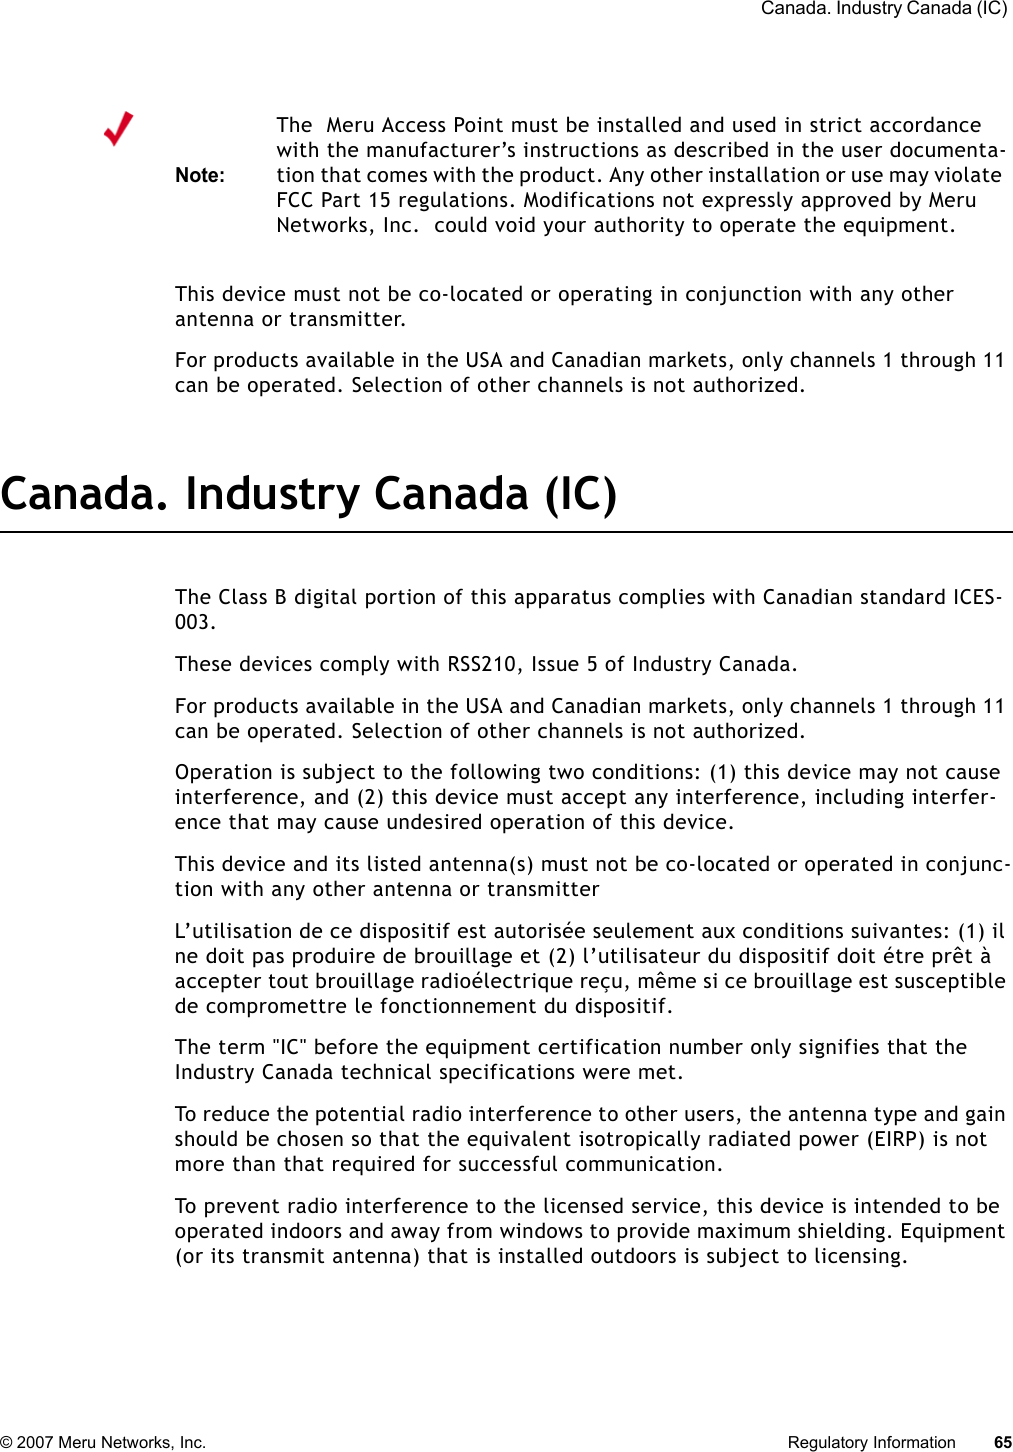  Canada. Industry Canada (IC) © 2007 Meru Networks, Inc. Regulatory Information 65 This device must not be co-located or operating in conjunction with any other antenna or transmitter.For products available in the USA and Canadian markets, only channels 1 through 11 can be operated. Selection of other channels is not authorized.Canada. Industry Canada (IC)The Class B digital portion of this apparatus complies with Canadian standard ICES-003.These devices comply with RSS210, Issue 5 of Industry Canada.For products available in the USA and Canadian markets, only channels 1 through 11 can be operated. Selection of other channels is not authorized.Operation is subject to the following two conditions: (1) this device may not cause interference, and (2) this device must accept any interference, including interfer-ence that may cause undesired operation of this device. This device and its listed antenna(s) must not be co-located or operated in conjunc-tion with any other antenna or transmitterL’utilisation de ce dispositif est autorisée seulement aux conditions suivantes: (1) il ne doit pas produire de brouillage et (2) l’utilisateur du dispositif doit étre prêt à accepter tout brouillage radioélectrique reçu, même si ce brouillage est susceptible de compromettre le fonctionnement du dispositif. The term &quot;IC&quot; before the equipment certification number only signifies that the Industry Canada technical specifications were met. To reduce the potential radio interference to other users, the antenna type and gain should be chosen so that the equivalent isotropically radiated power (EIRP) is not more than that required for successful communication. To prevent radio interference to the licensed service, this device is intended to be operated indoors and away from windows to provide maximum shielding. Equipment (or its transmit antenna) that is installed outdoors is subject to licensing. Note:The  Meru Access Point must be installed and used in strict accordance with the manufacturer’s instructions as described in the user documenta-tion that comes with the product. Any other installation or use may violate FCC Part 15 regulations. Modifications not expressly approved by Meru Networks, Inc.  could void your authority to operate the equipment. 